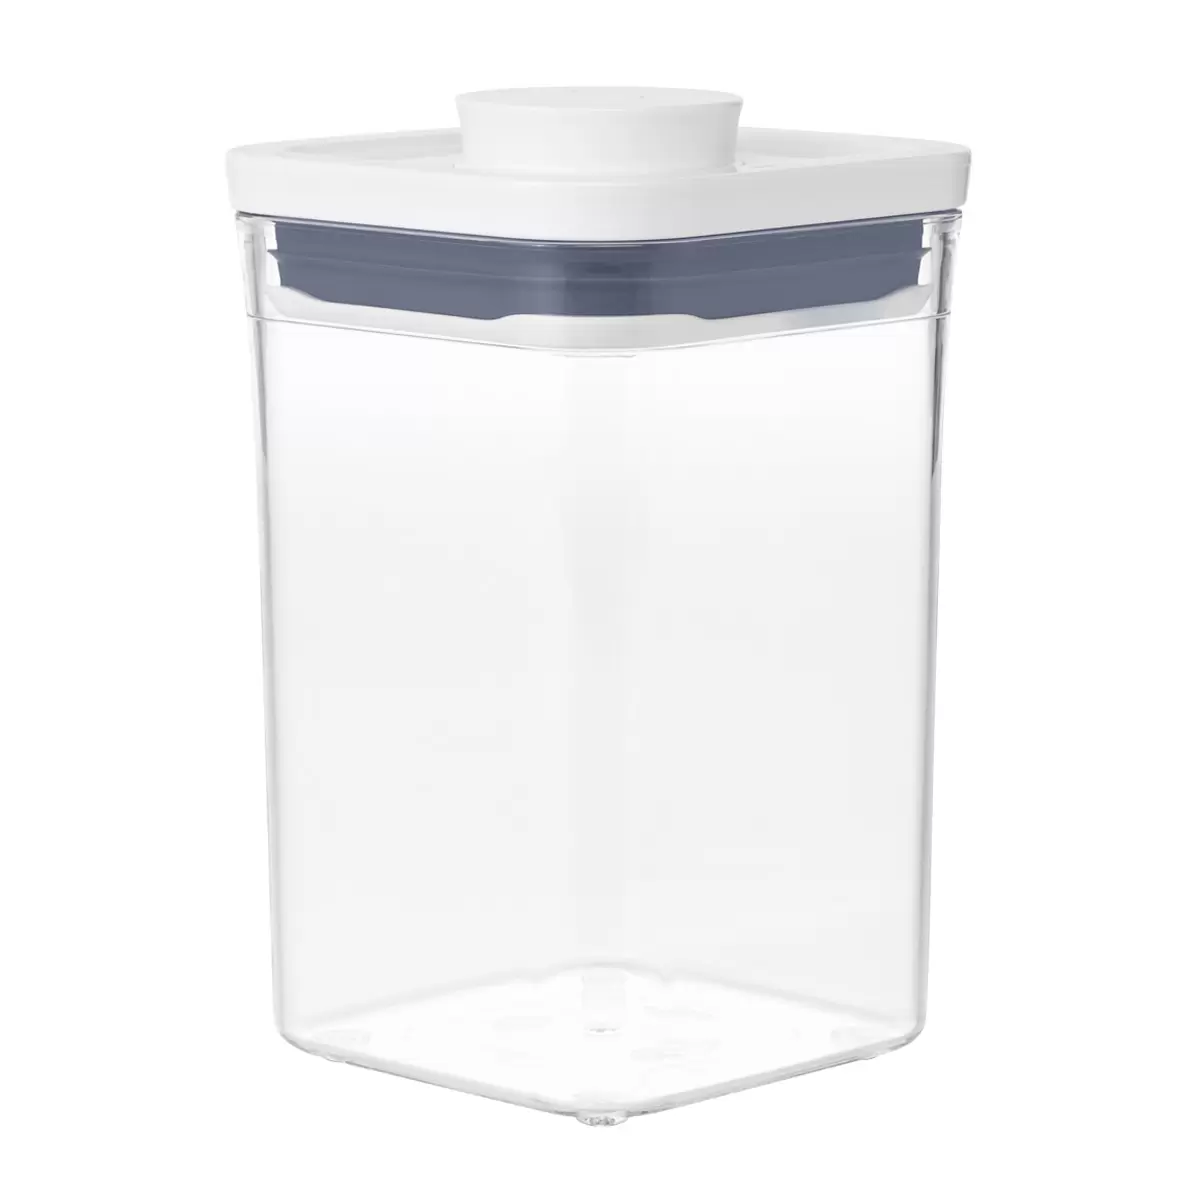 OXO Good Grips POP Square | The Container Store